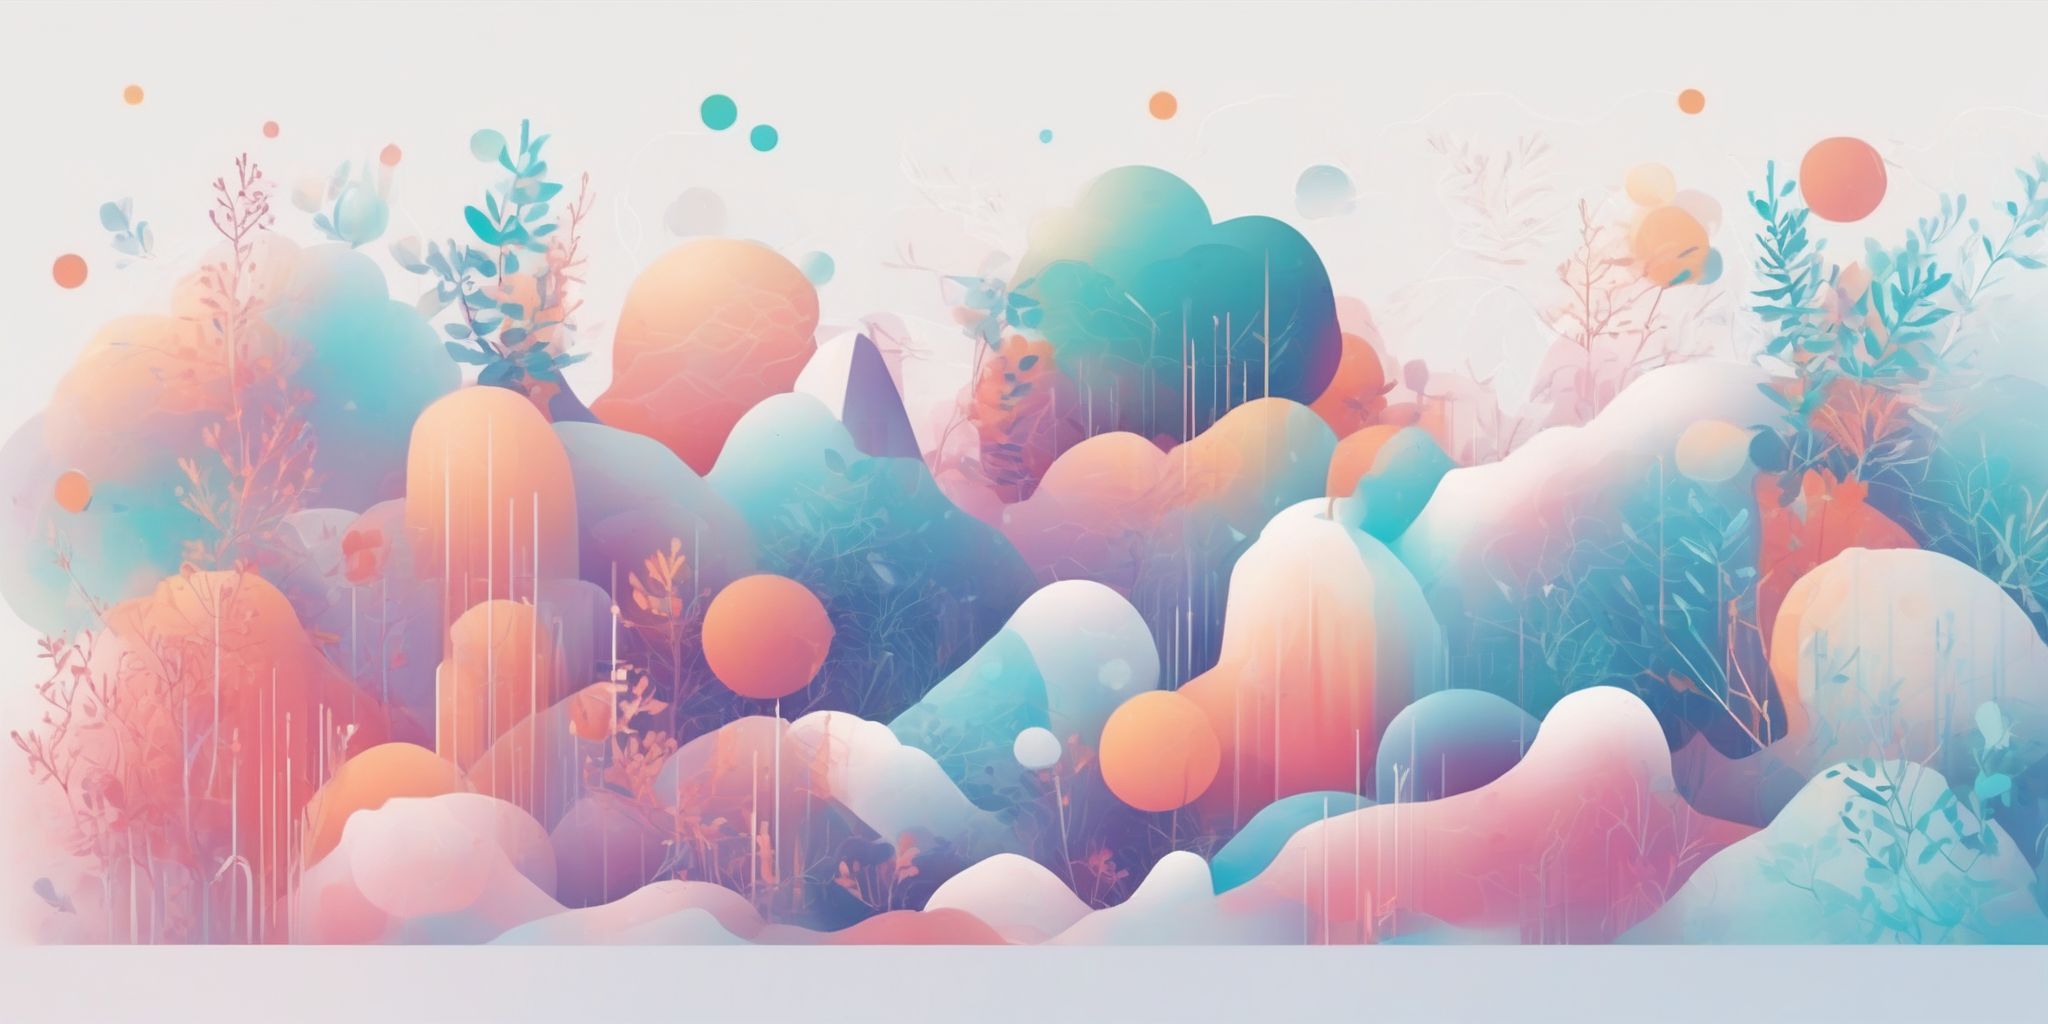 trends in illustration style with gradients and white background